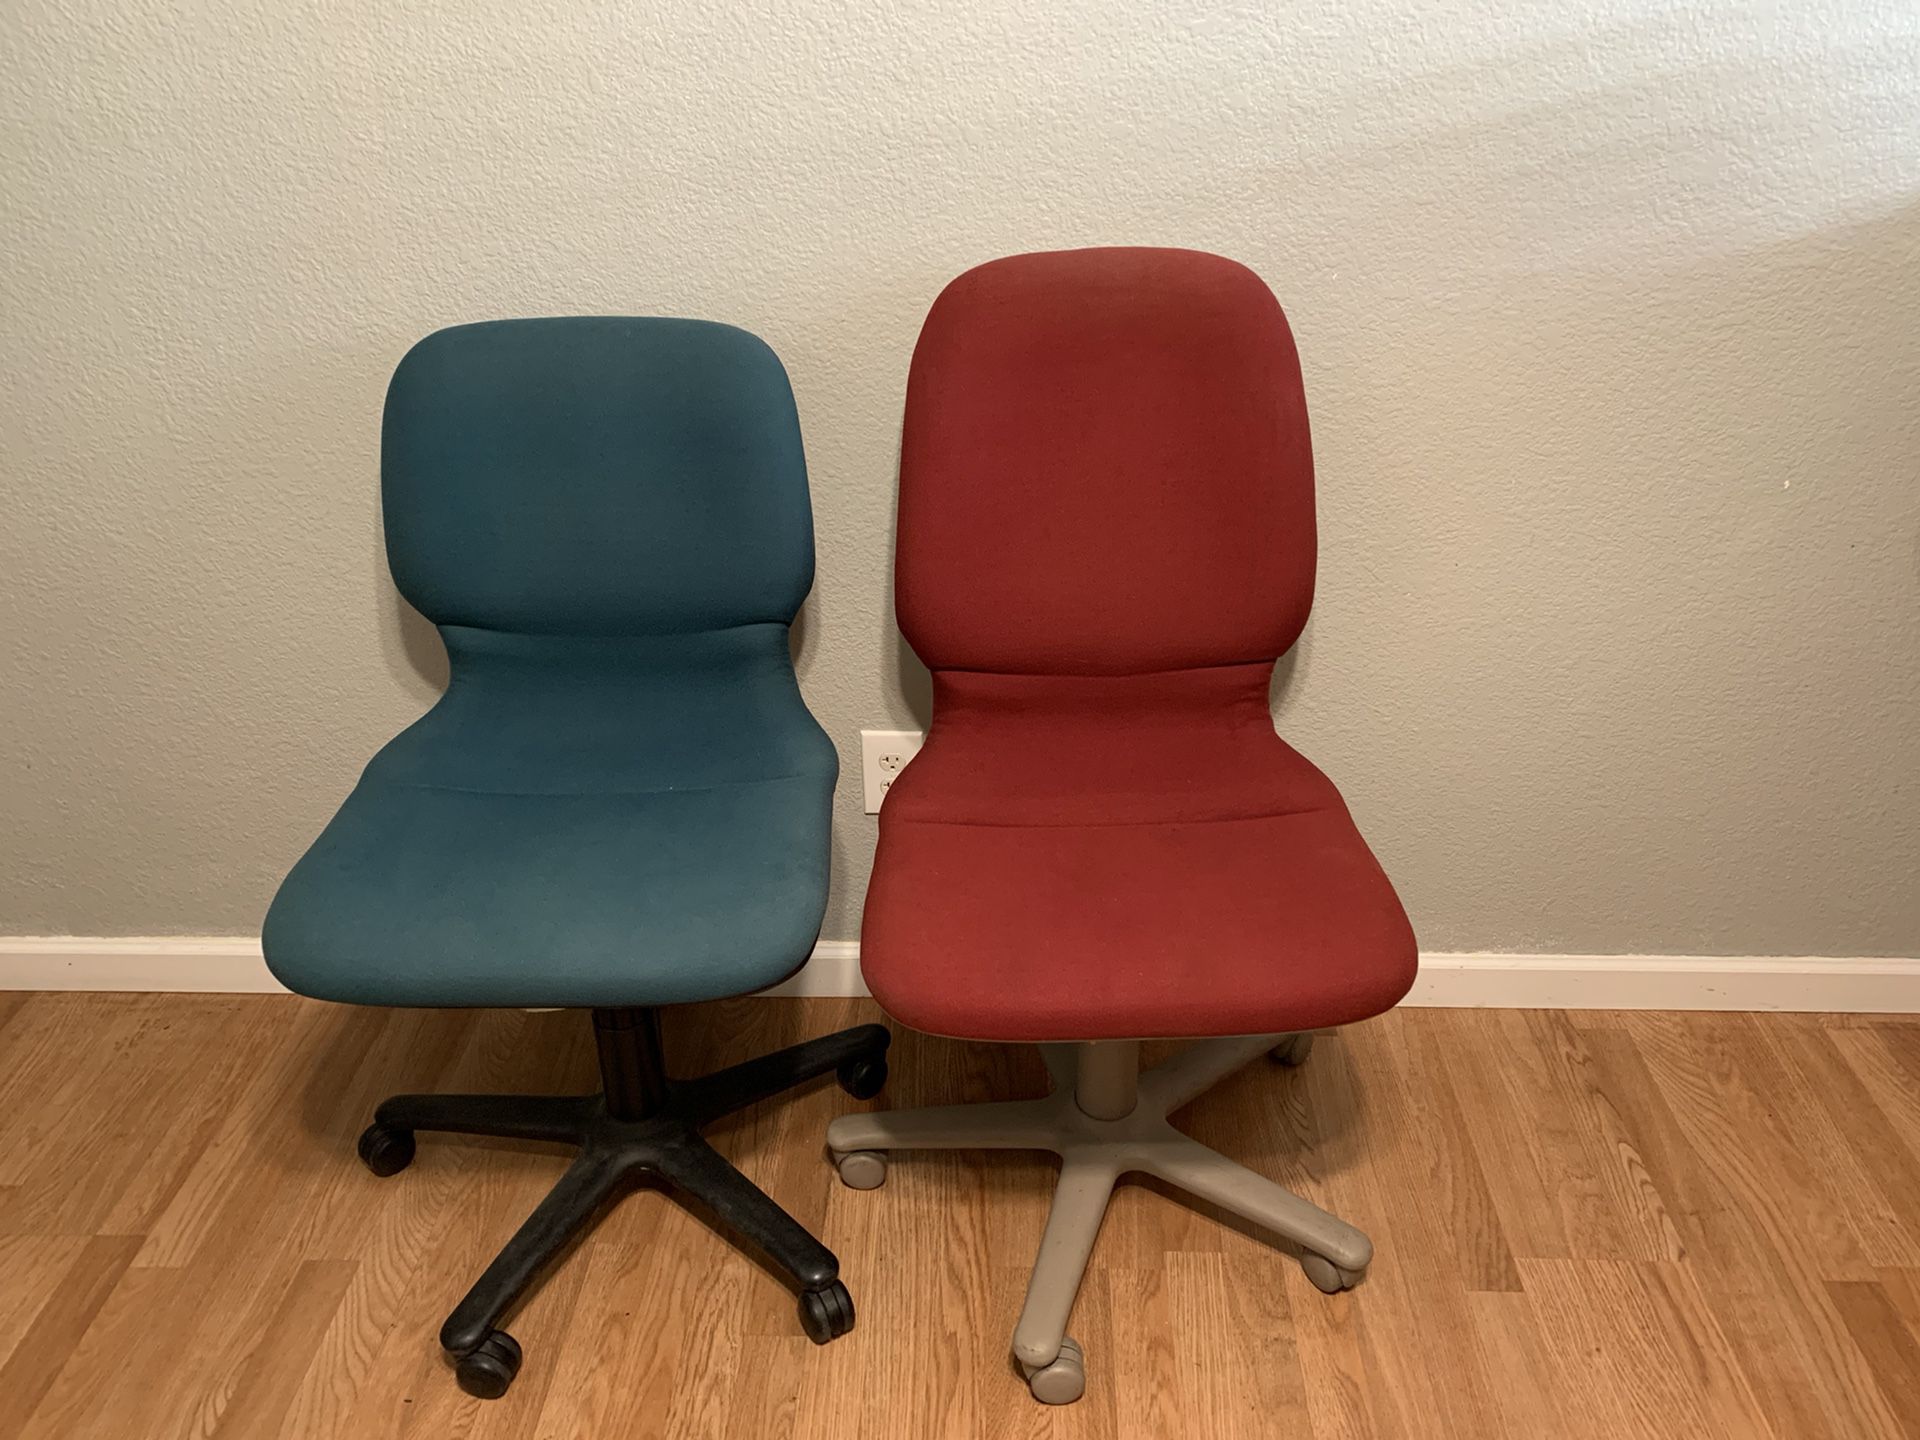 Bright colored rolling office chairs a pair 35 each 15 you pick up no shipping